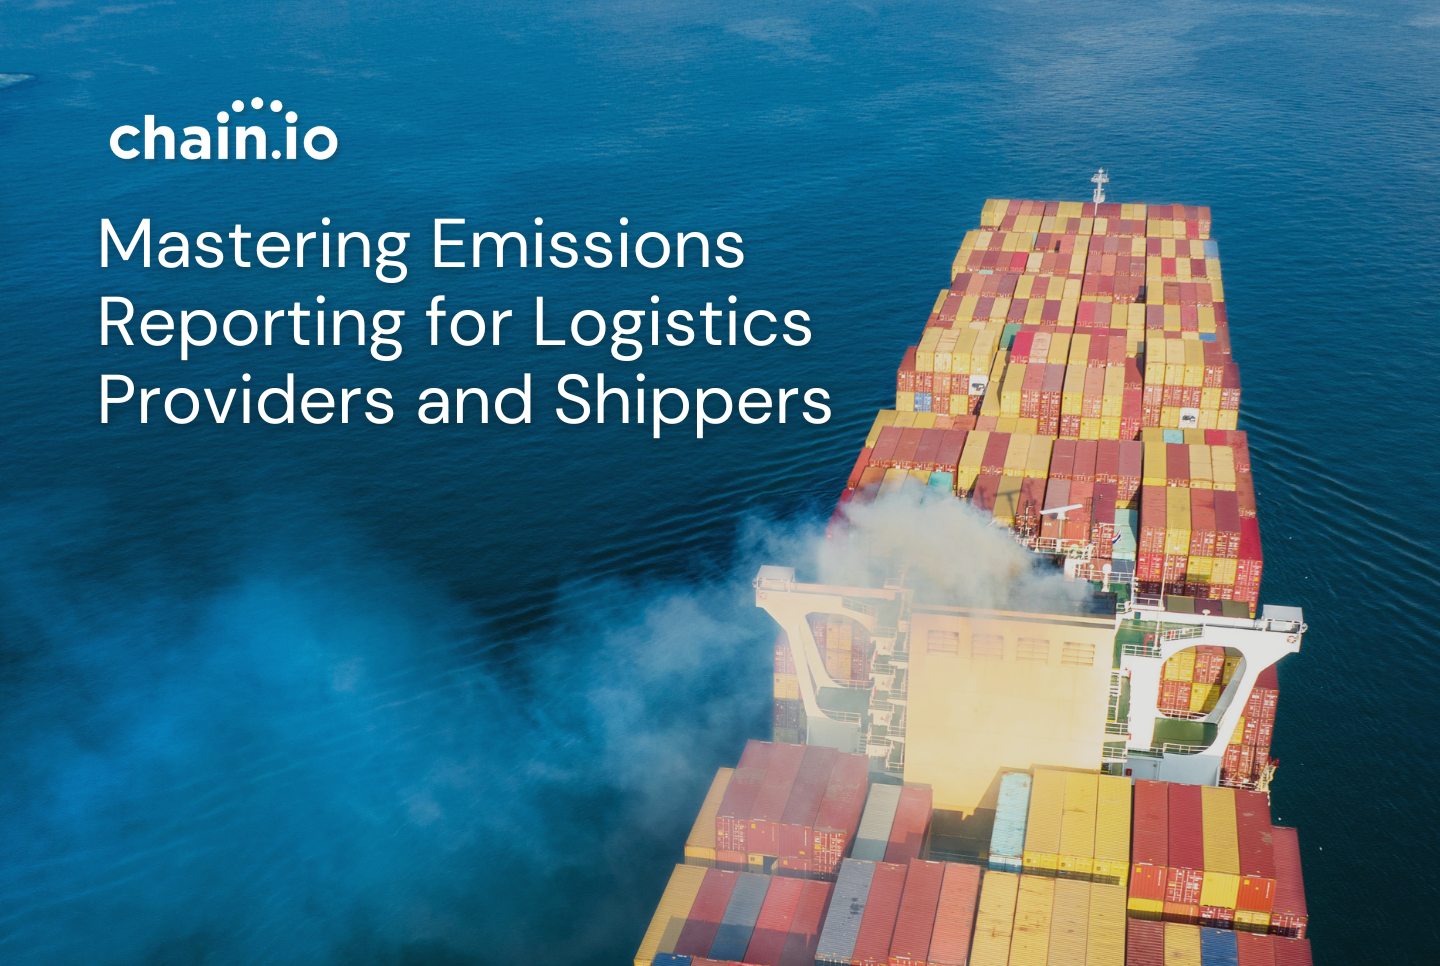 Mastering Emissions Reporting for Logistics Providers and Shippers